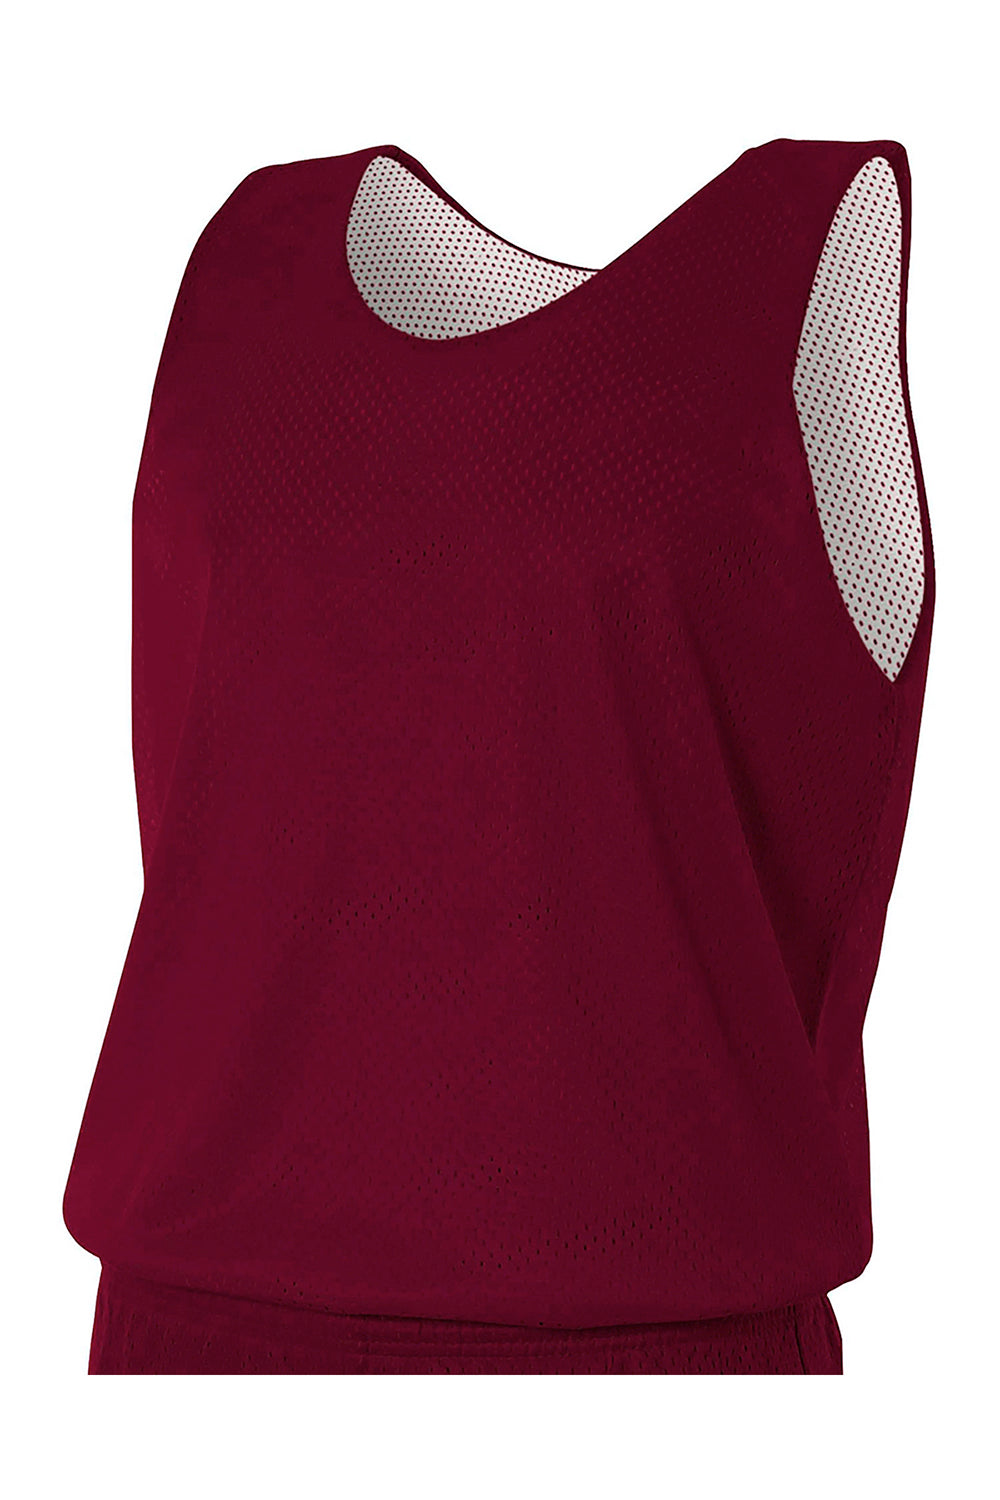 A4 NF1270 Mens Reversible Mesh Moisture Wicking Tank Top Maroon Flat Front